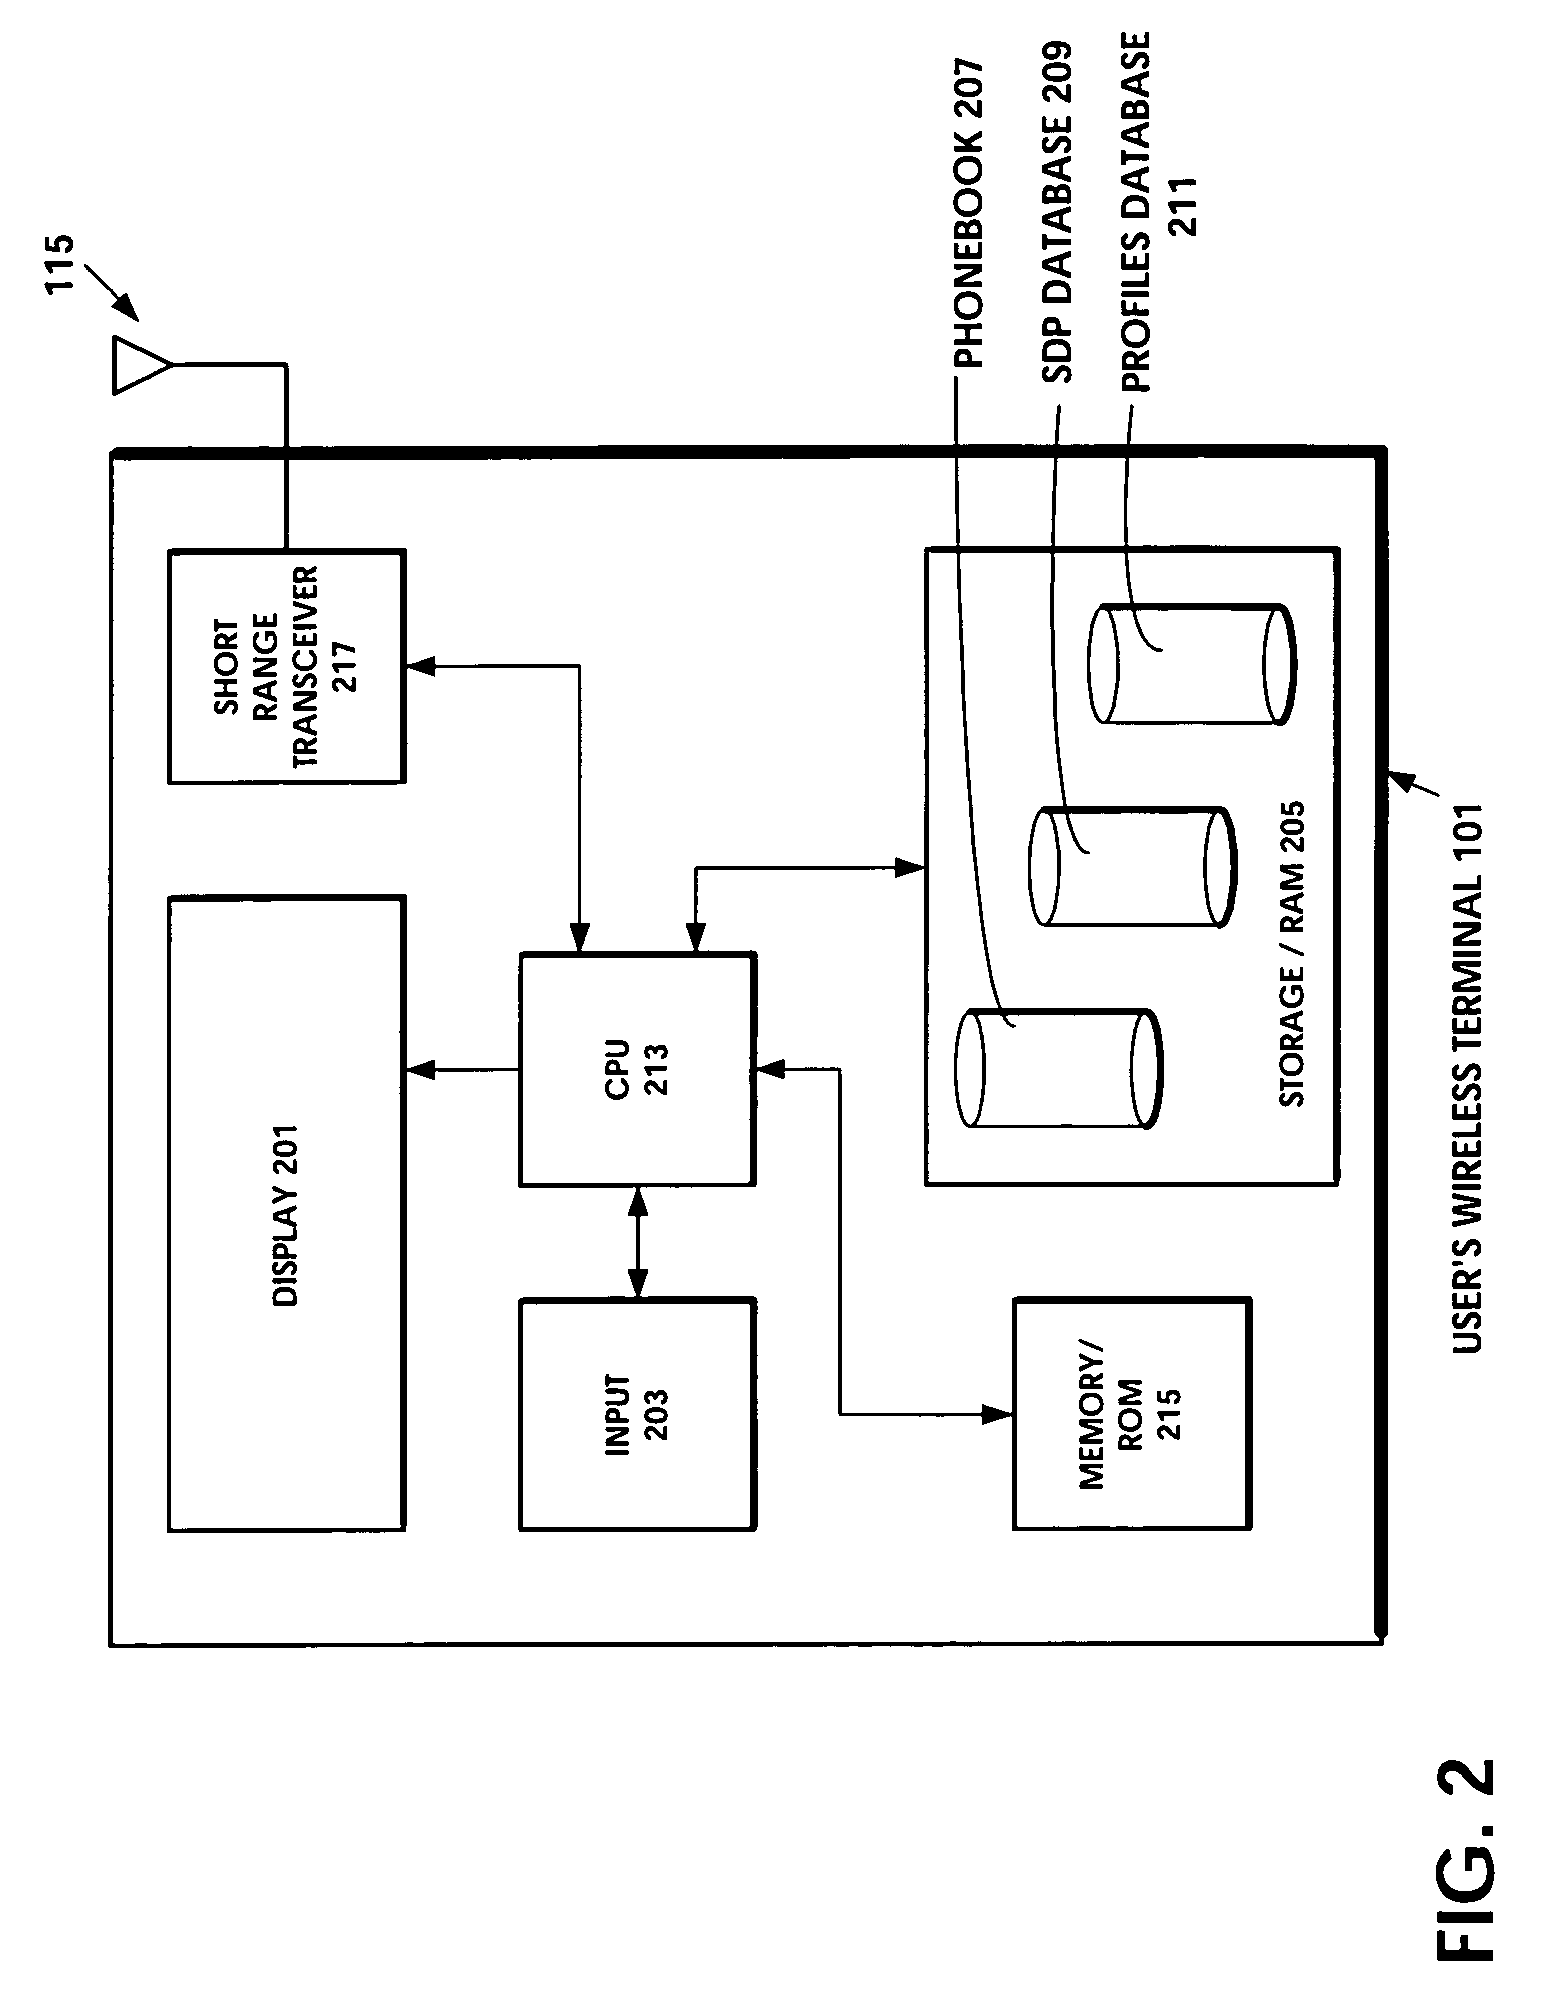 Personal profile sharing and management for short-range wireless terminals